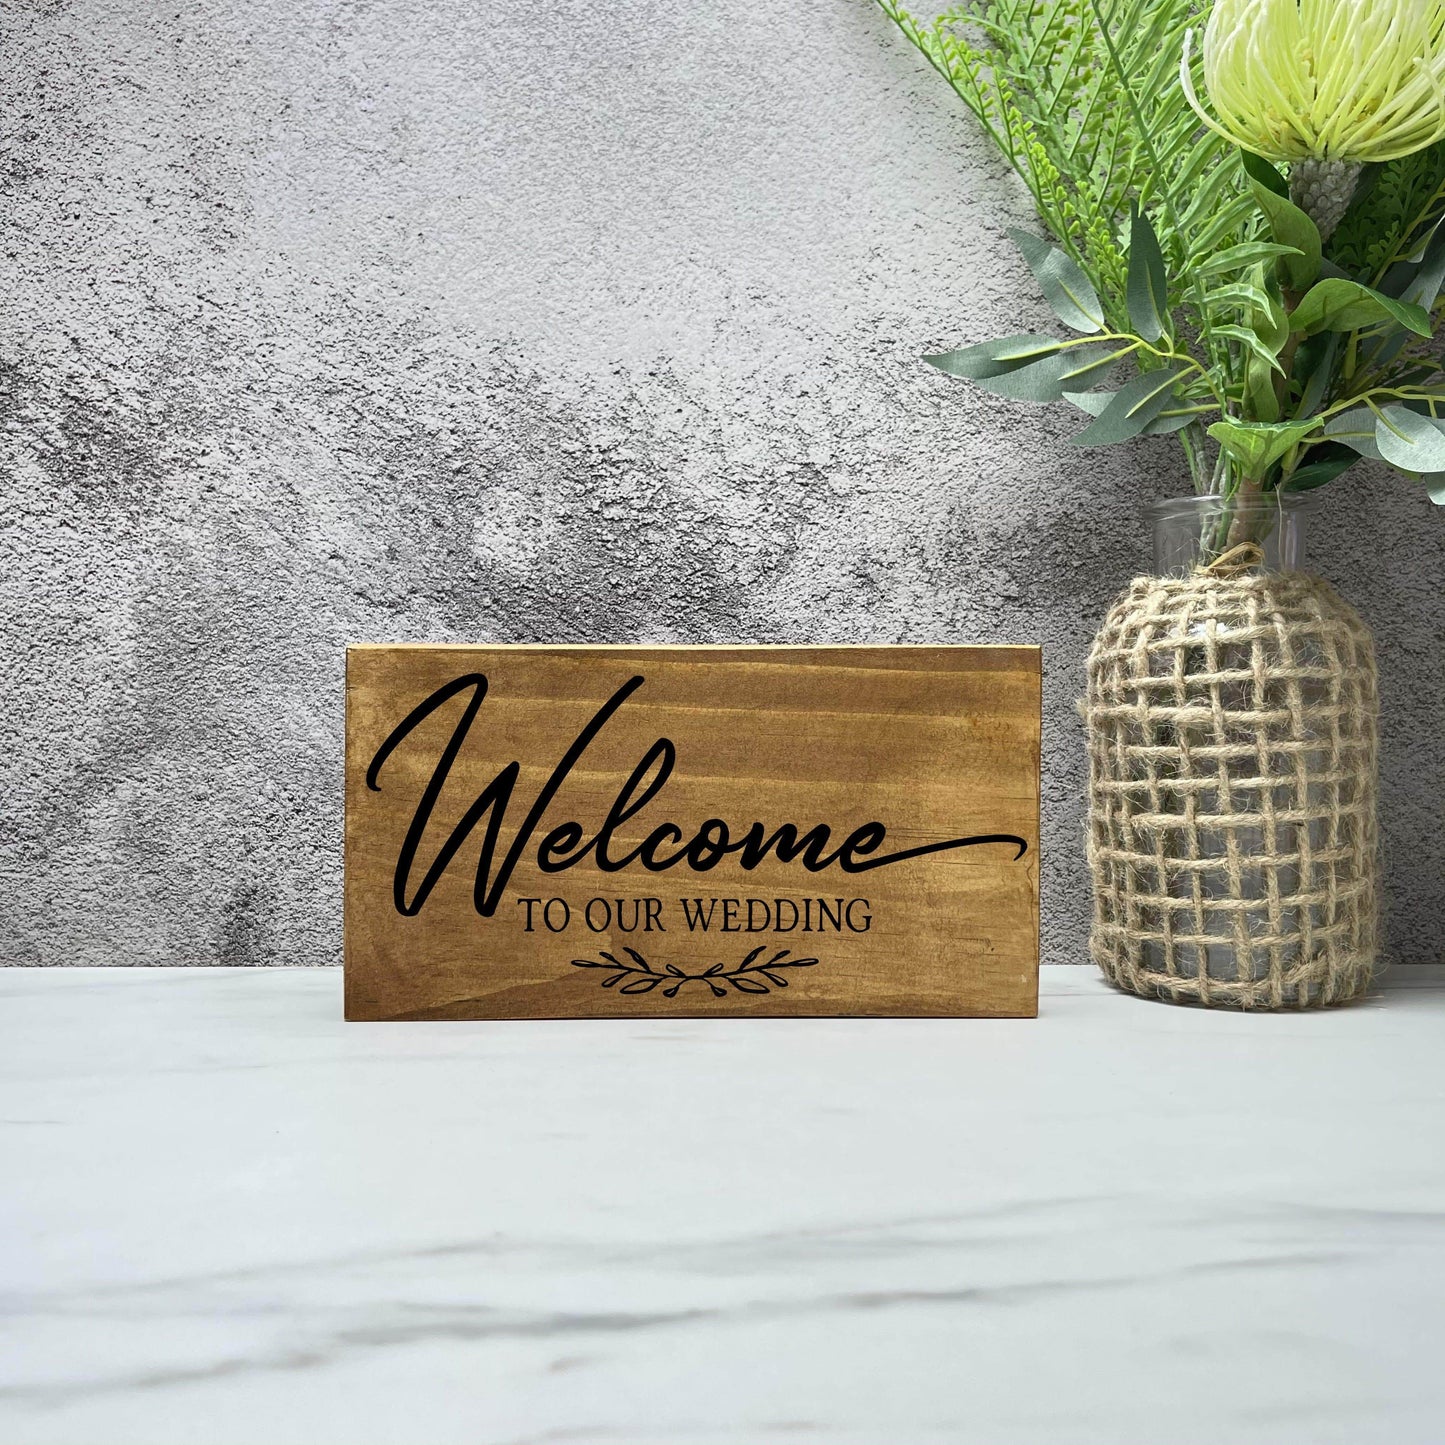 Welcome to Our Wedding - Wedding Wood Sign